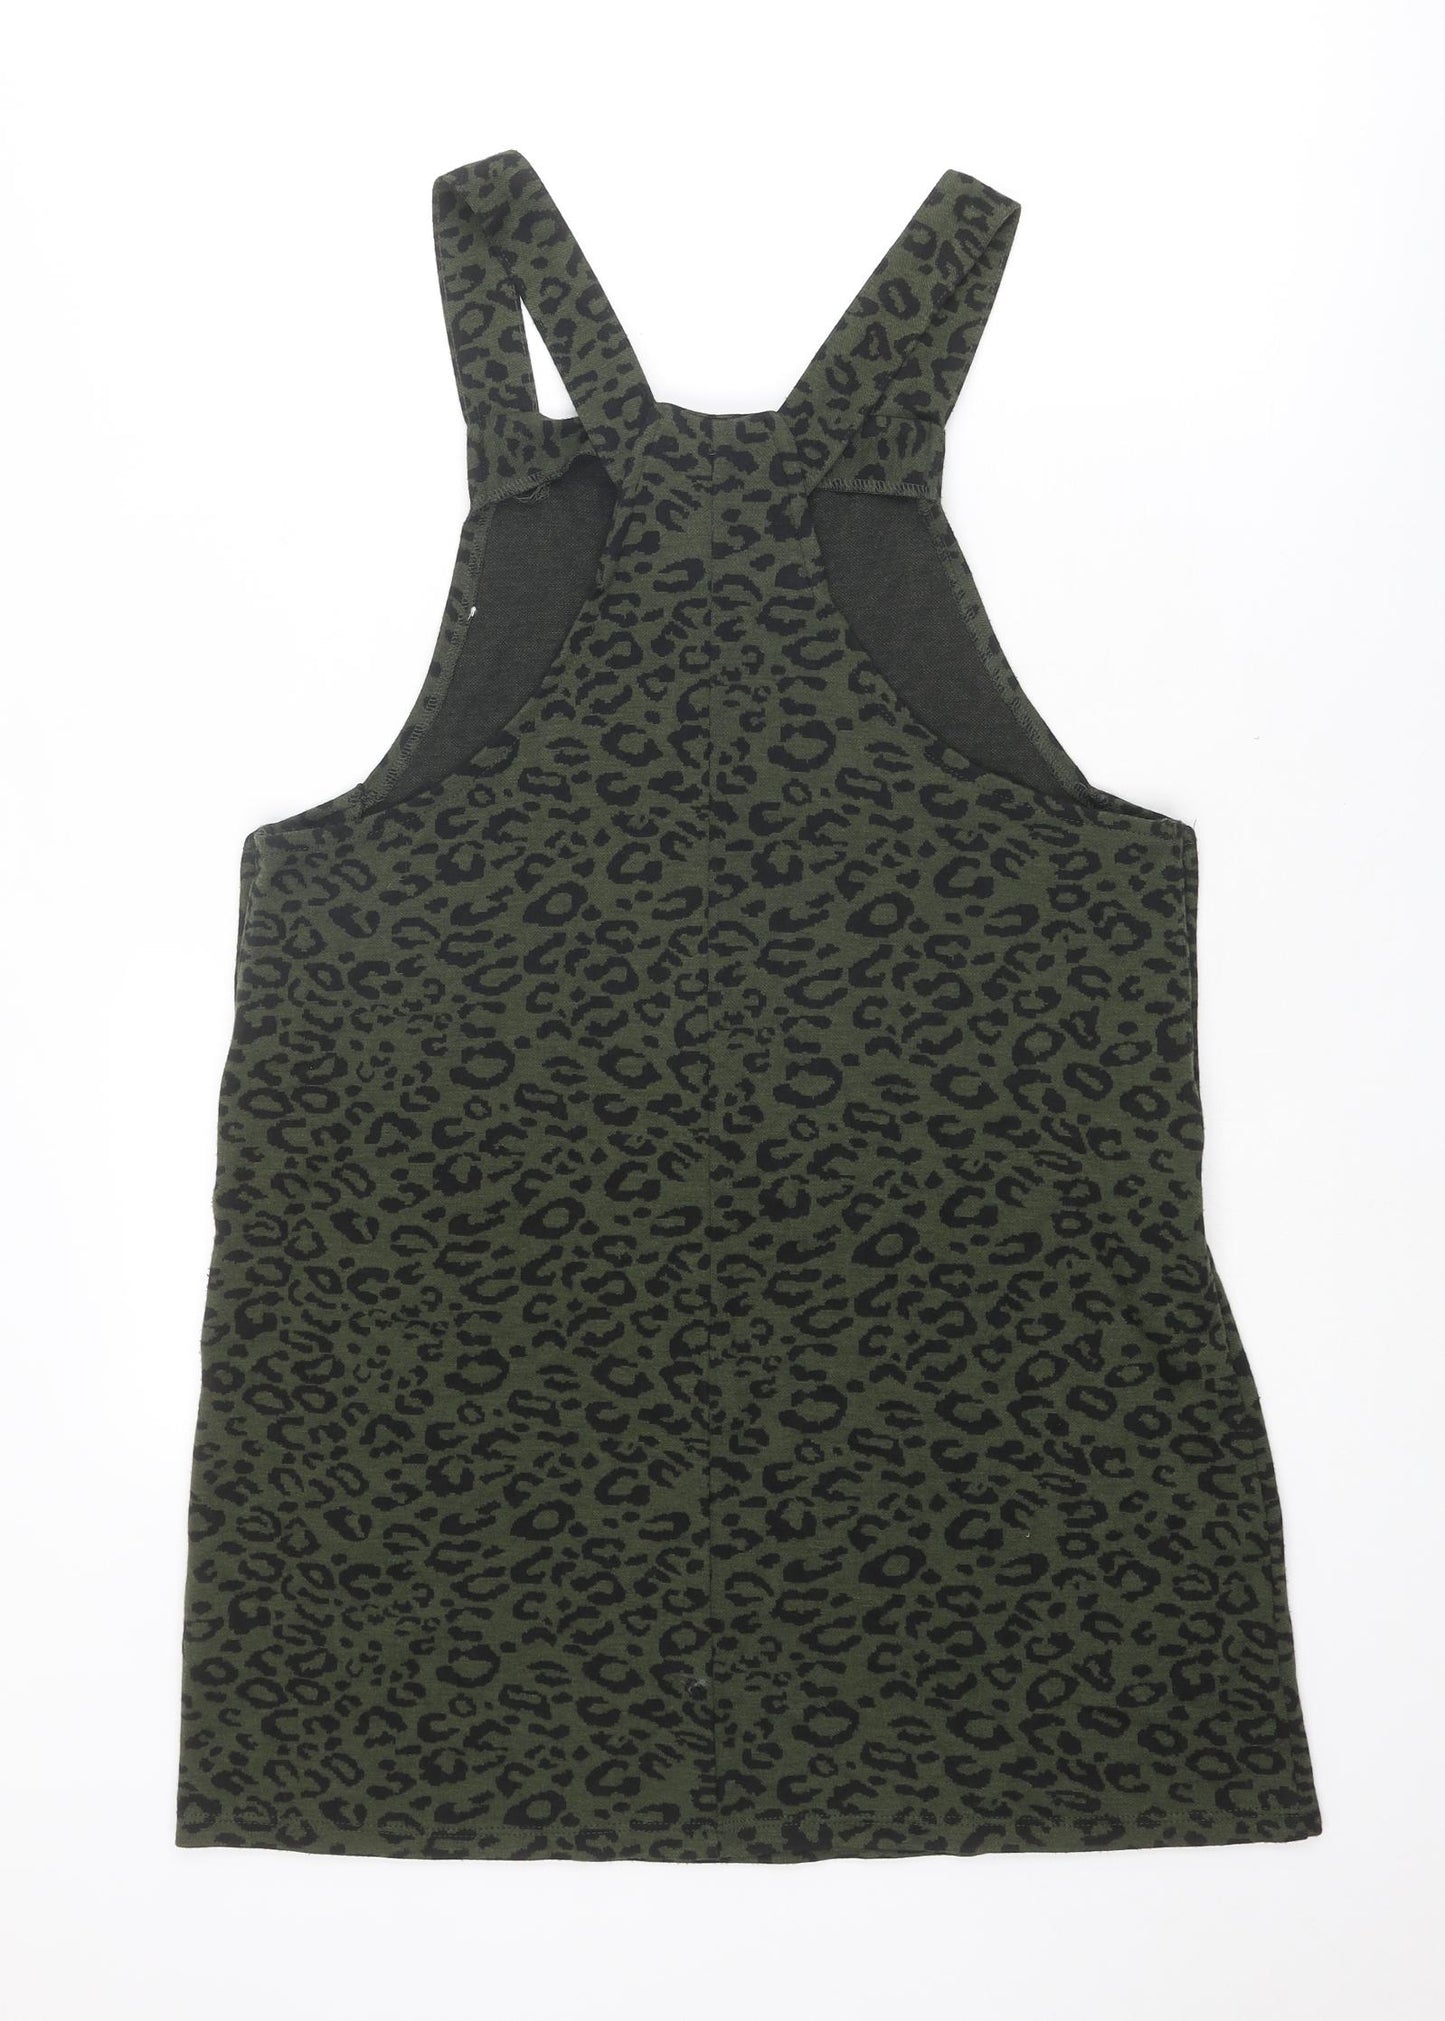 New Look Womens Green Animal Print Polyester Pinafore/Dungaree Dress Size 14 Square Neck Button - Leopard Print